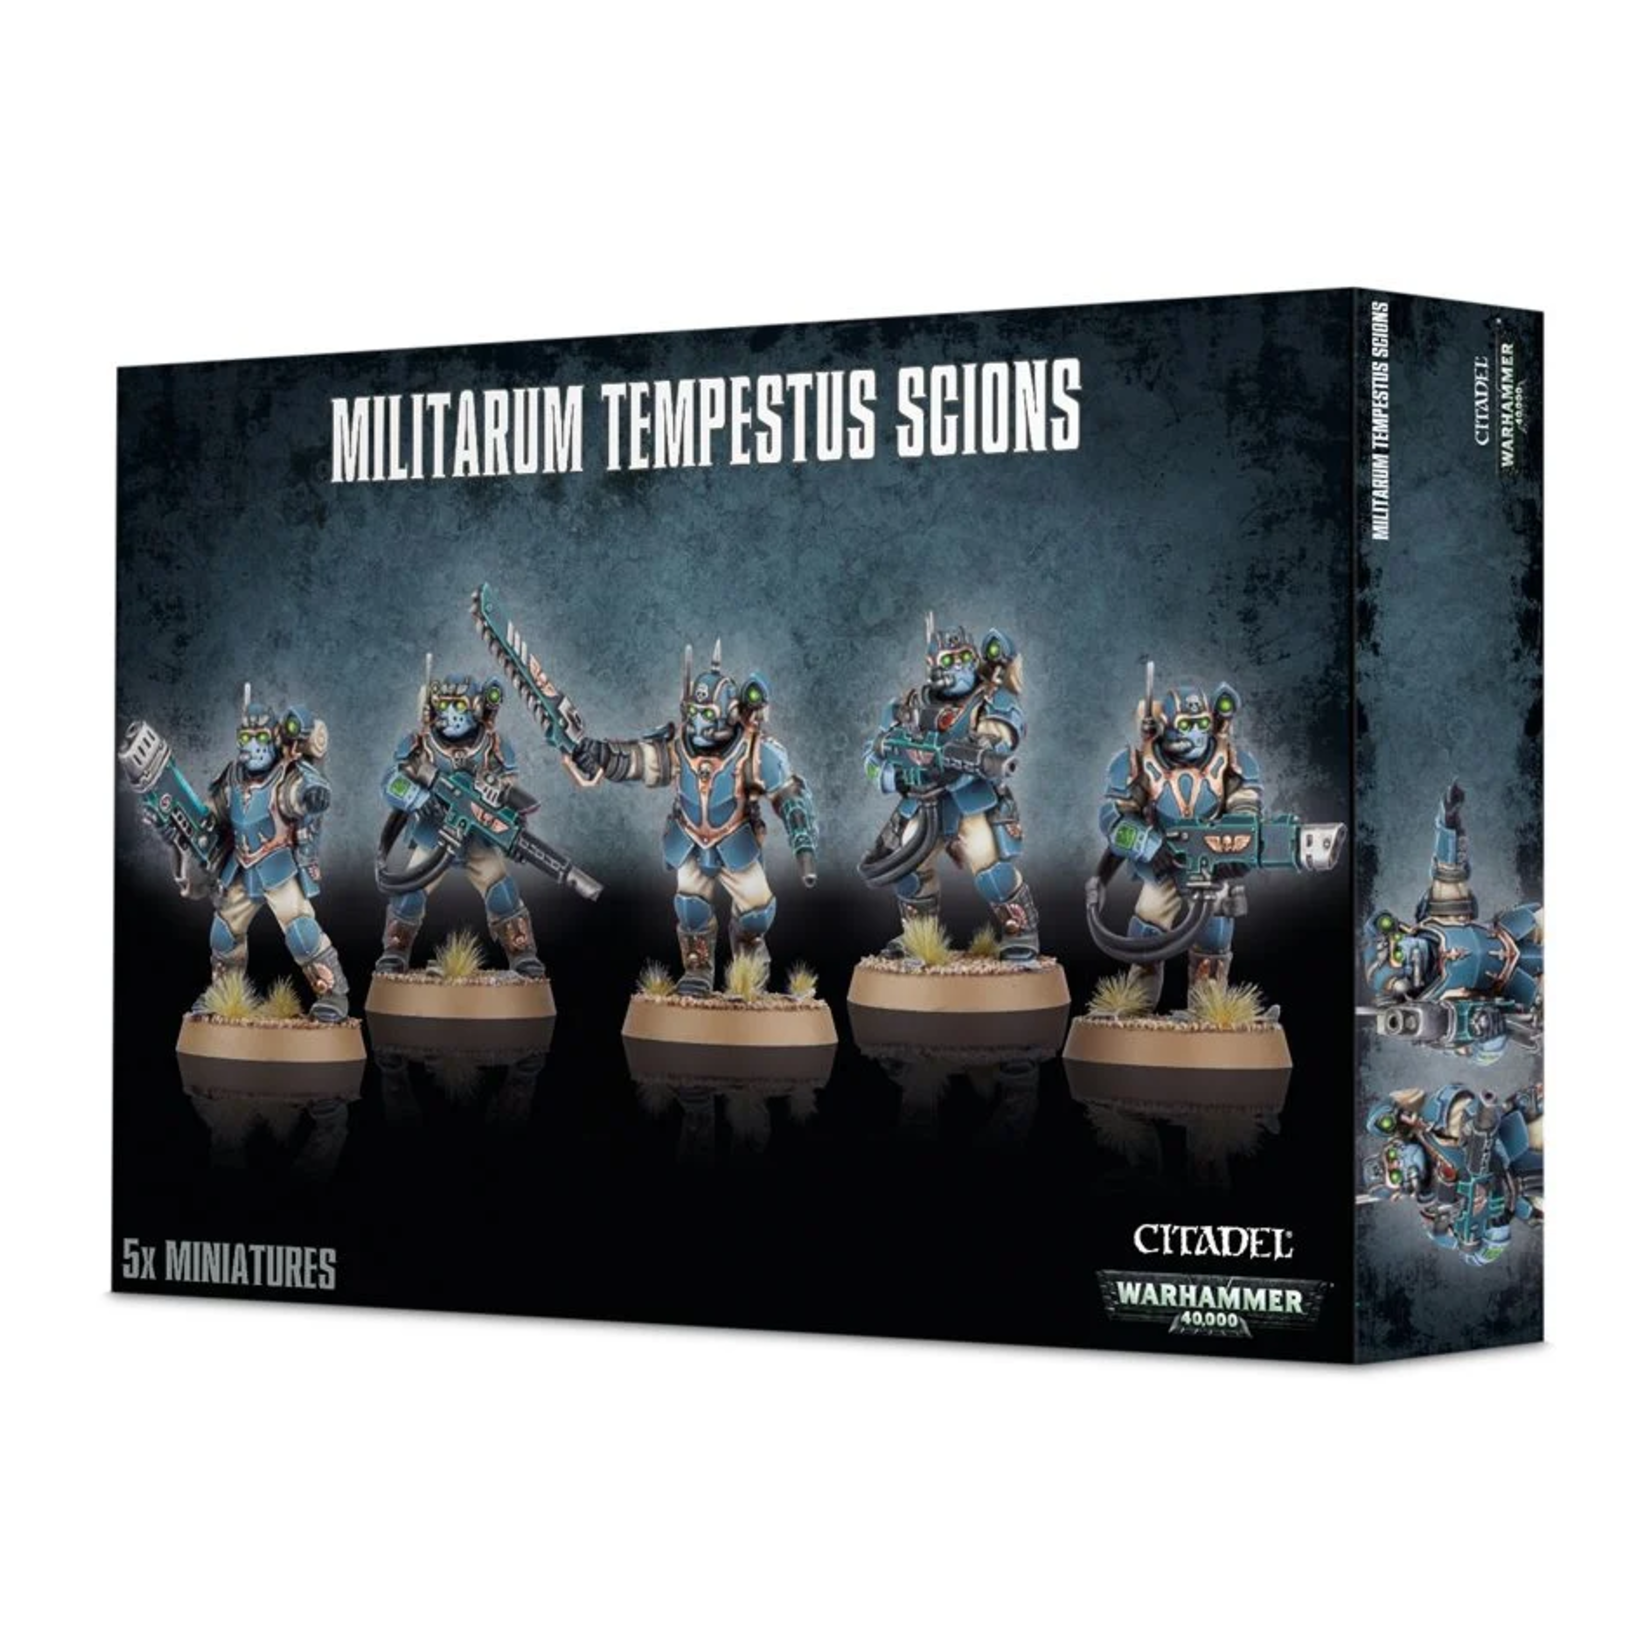 WH40K Thousand Sons Rubric Marines - The Wandering Dragon Game Shoppe